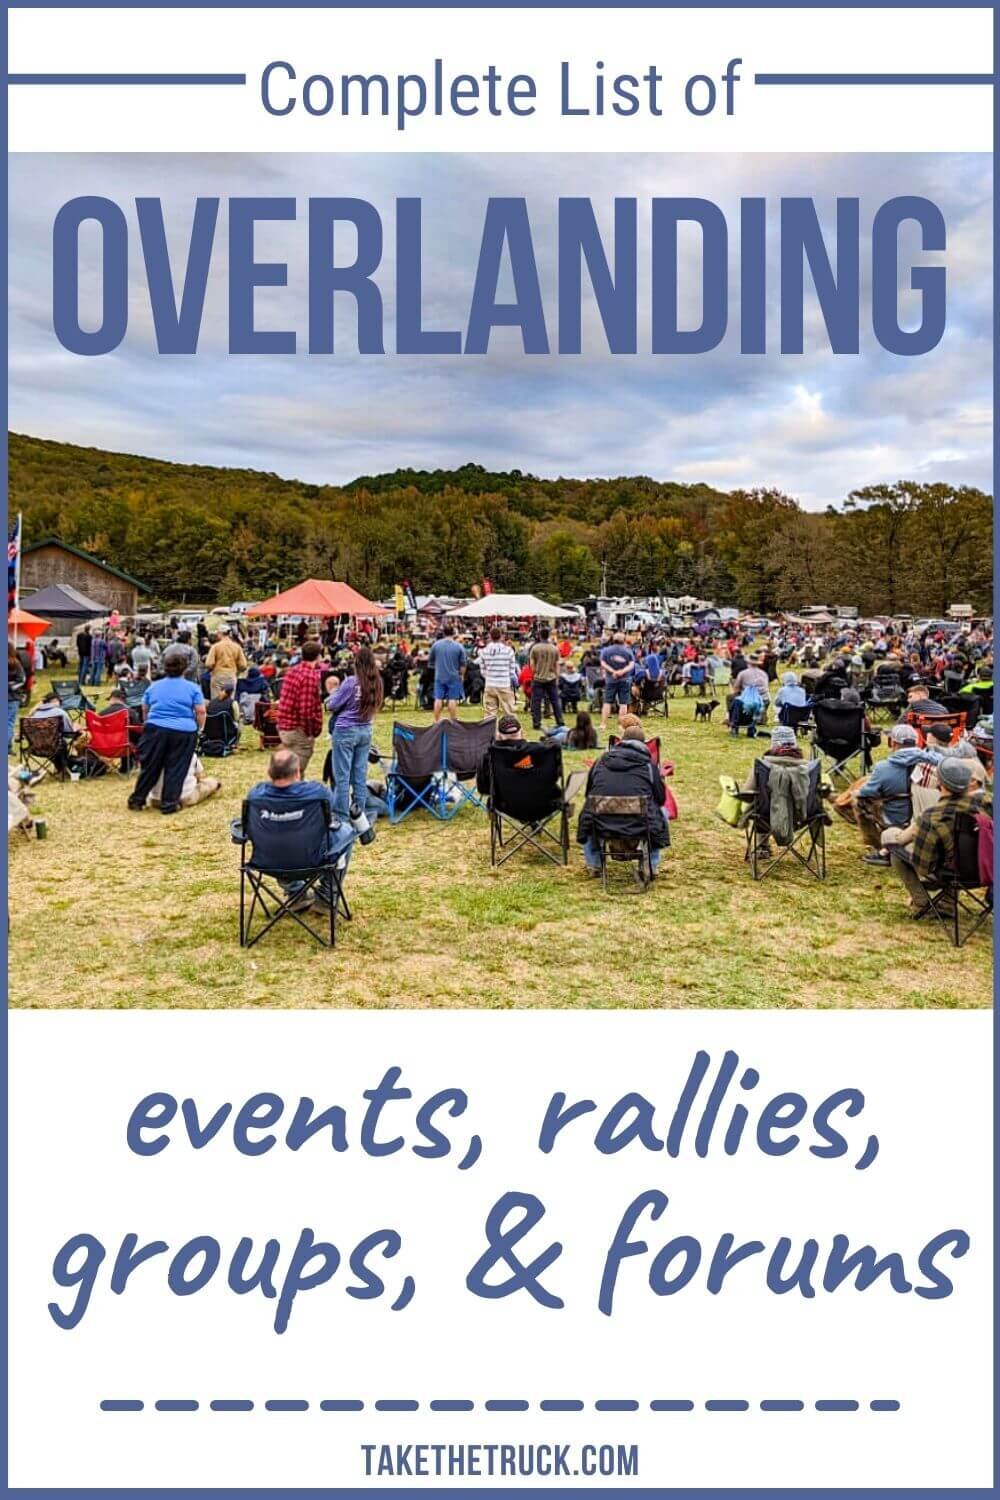 Are you an overlanding beginner wondering how to start overlanding? Use this master list to find an overland group, overland event, forum, overland rally, or overland expo all about overland travel!